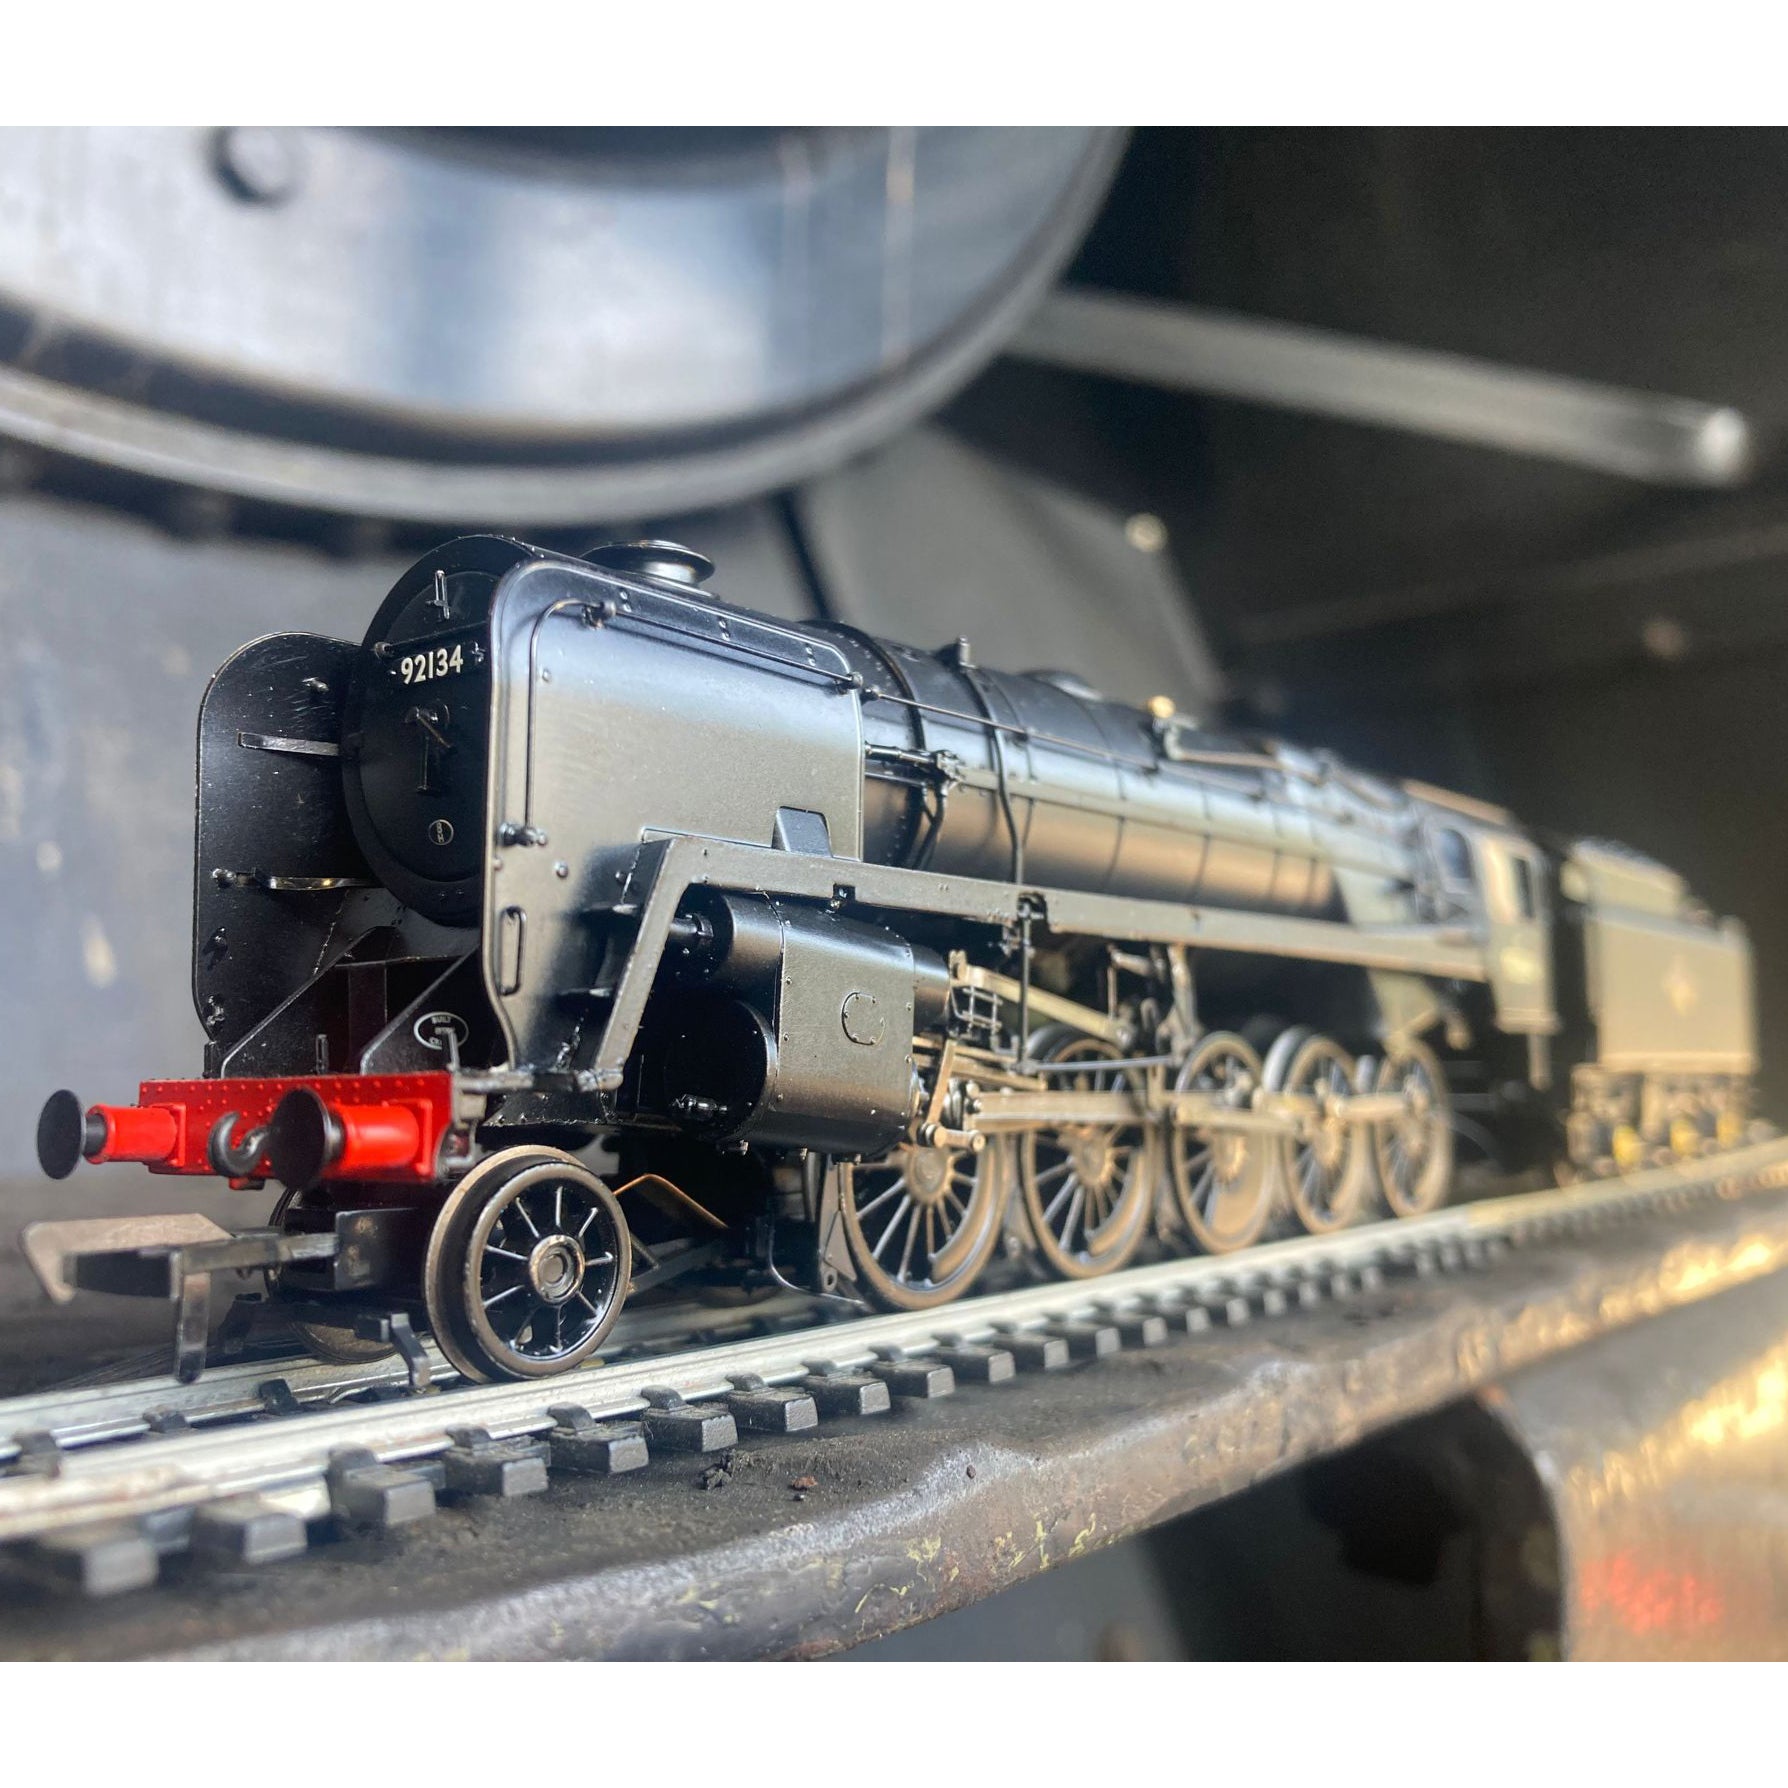 The Bachmann model sat on the front of the loco itself!